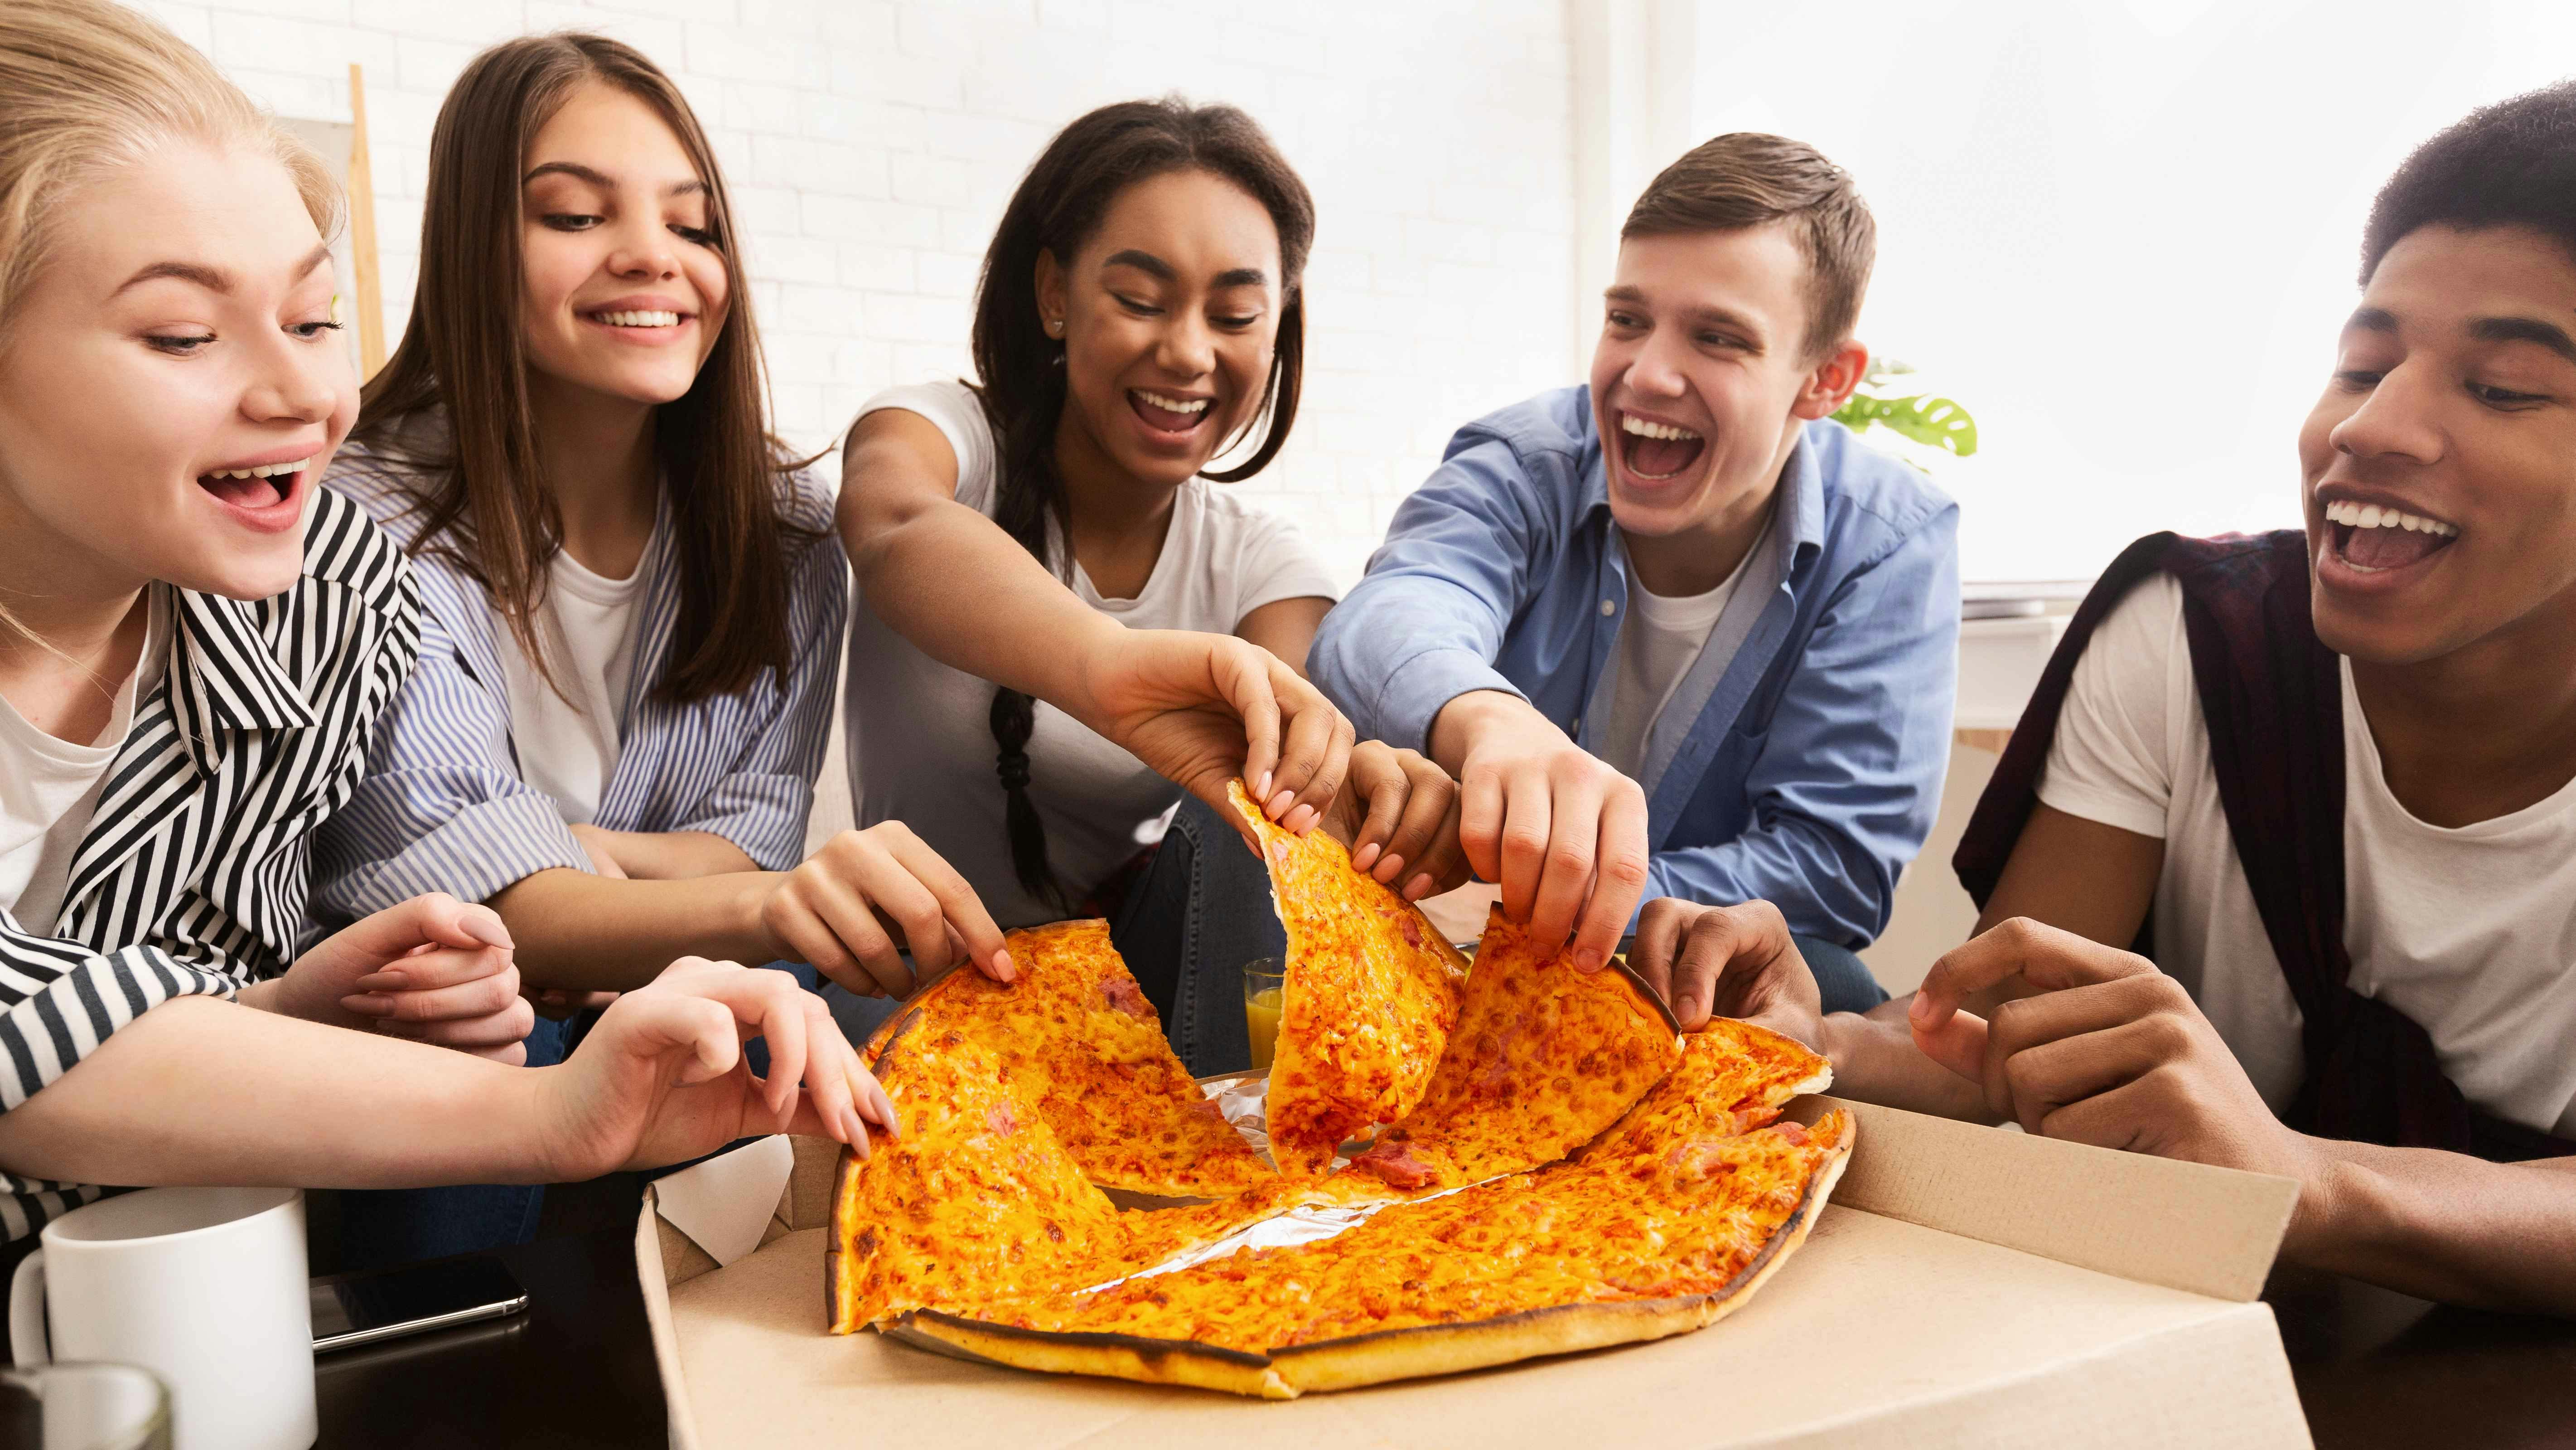 A group of teens eating pizza together